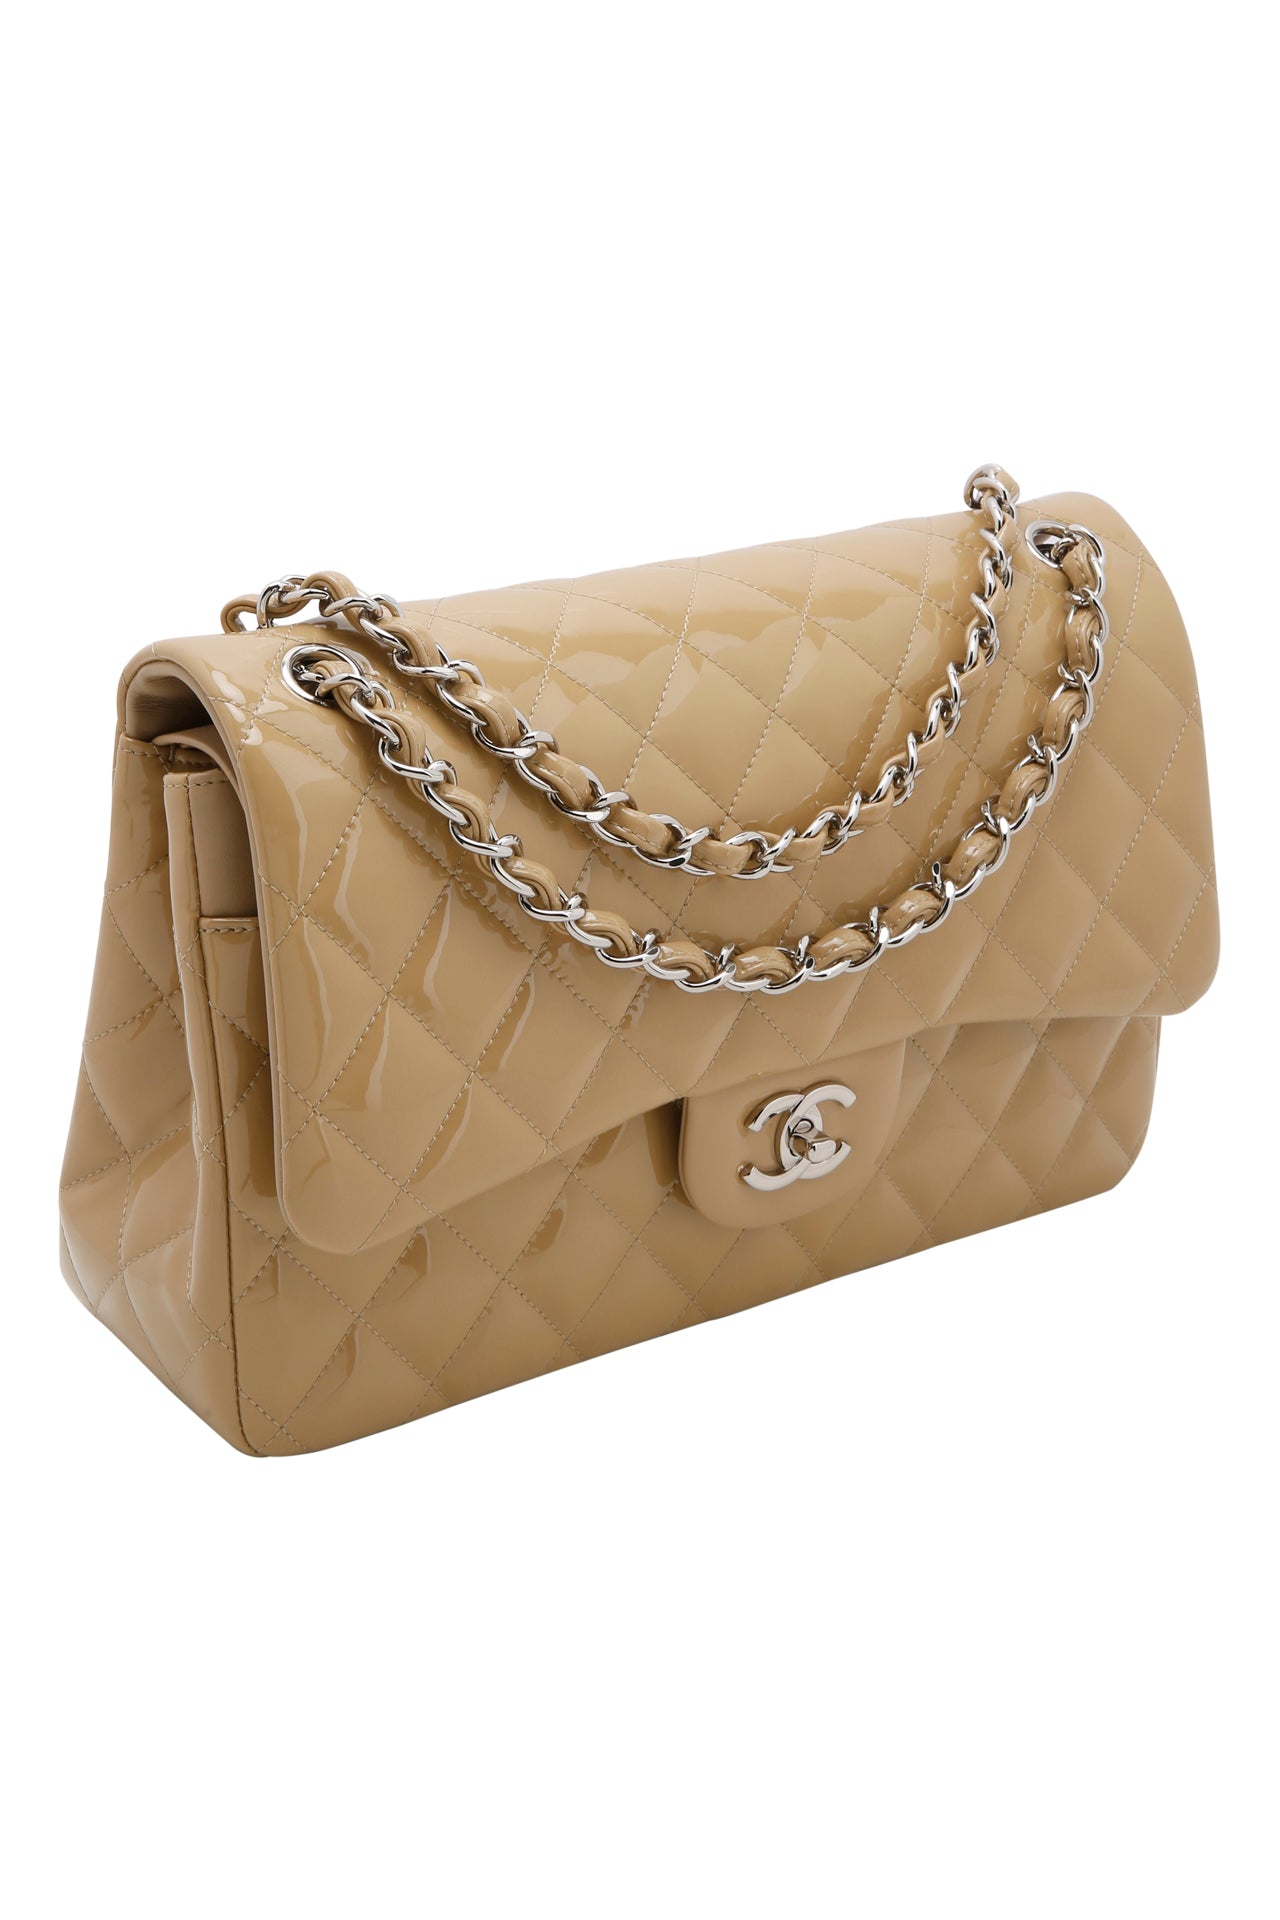 Chanel Beige Quilted Patent Leather Classic Jumbo Double Flap Bag